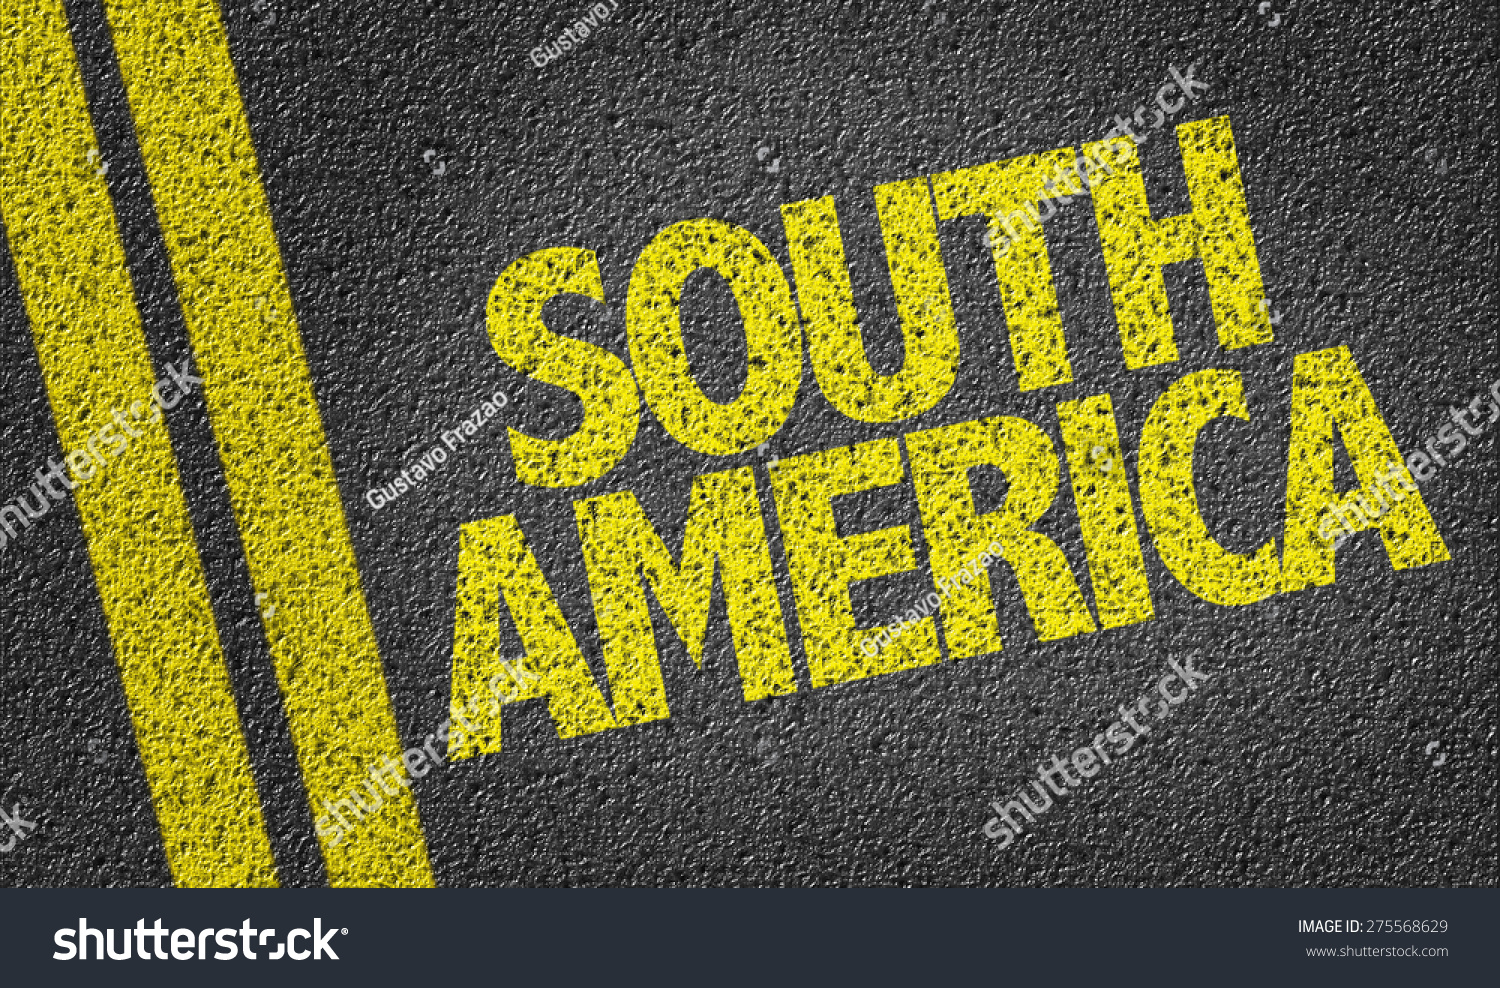 South America Written On Road | Backgrounds/Textures, Signs ...